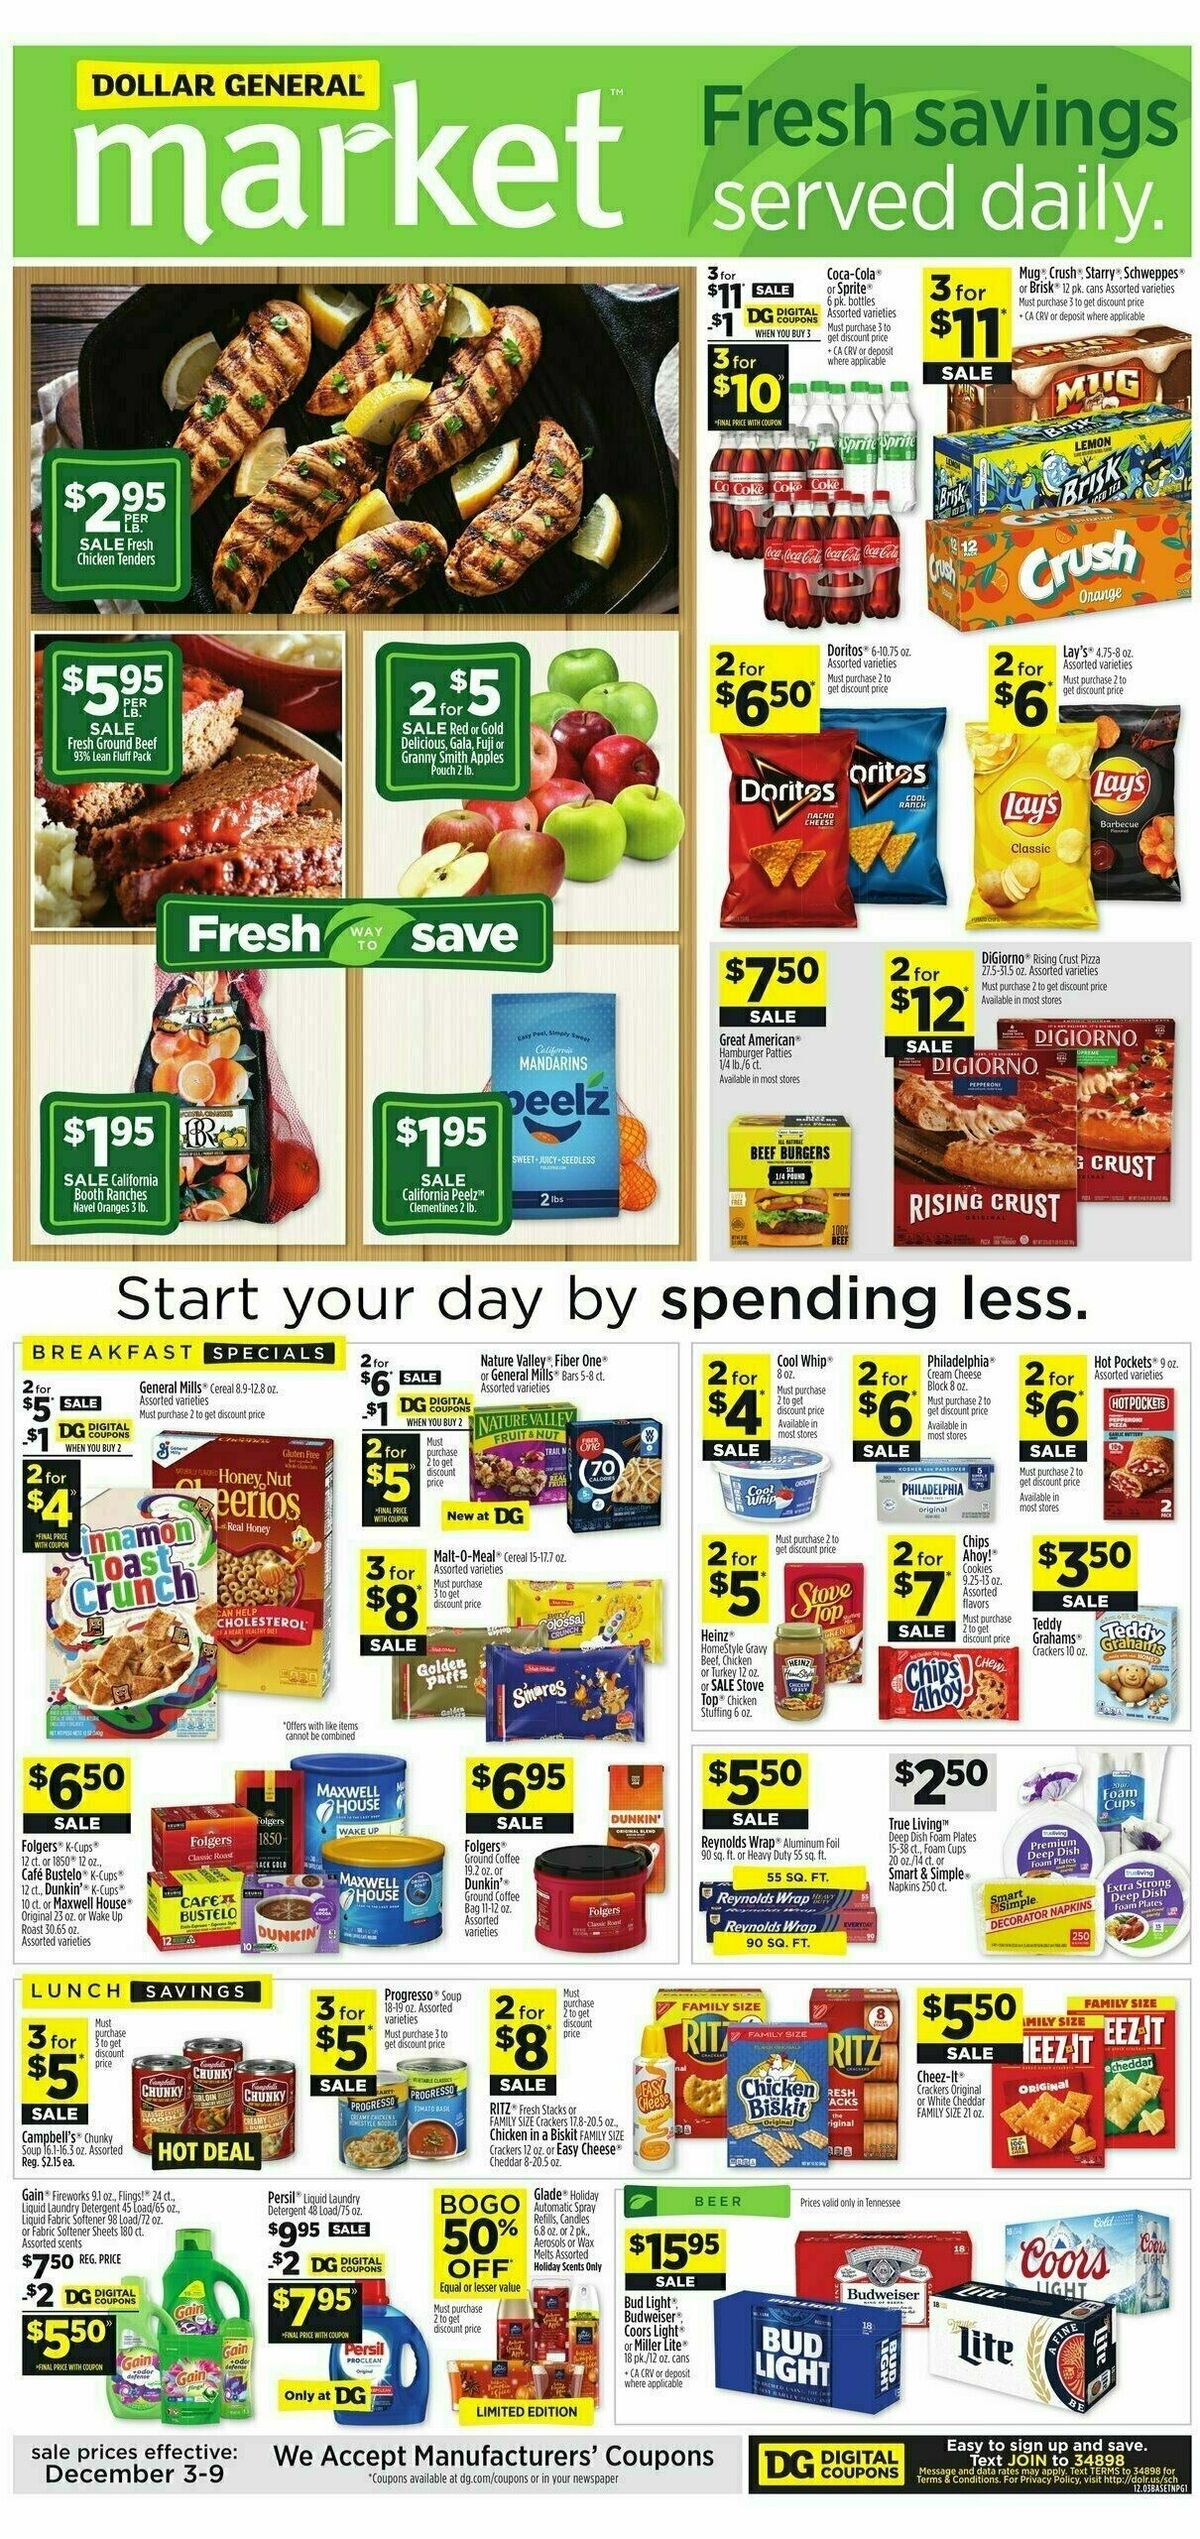 Dollar General Market Ad Weekly Ad from December 3